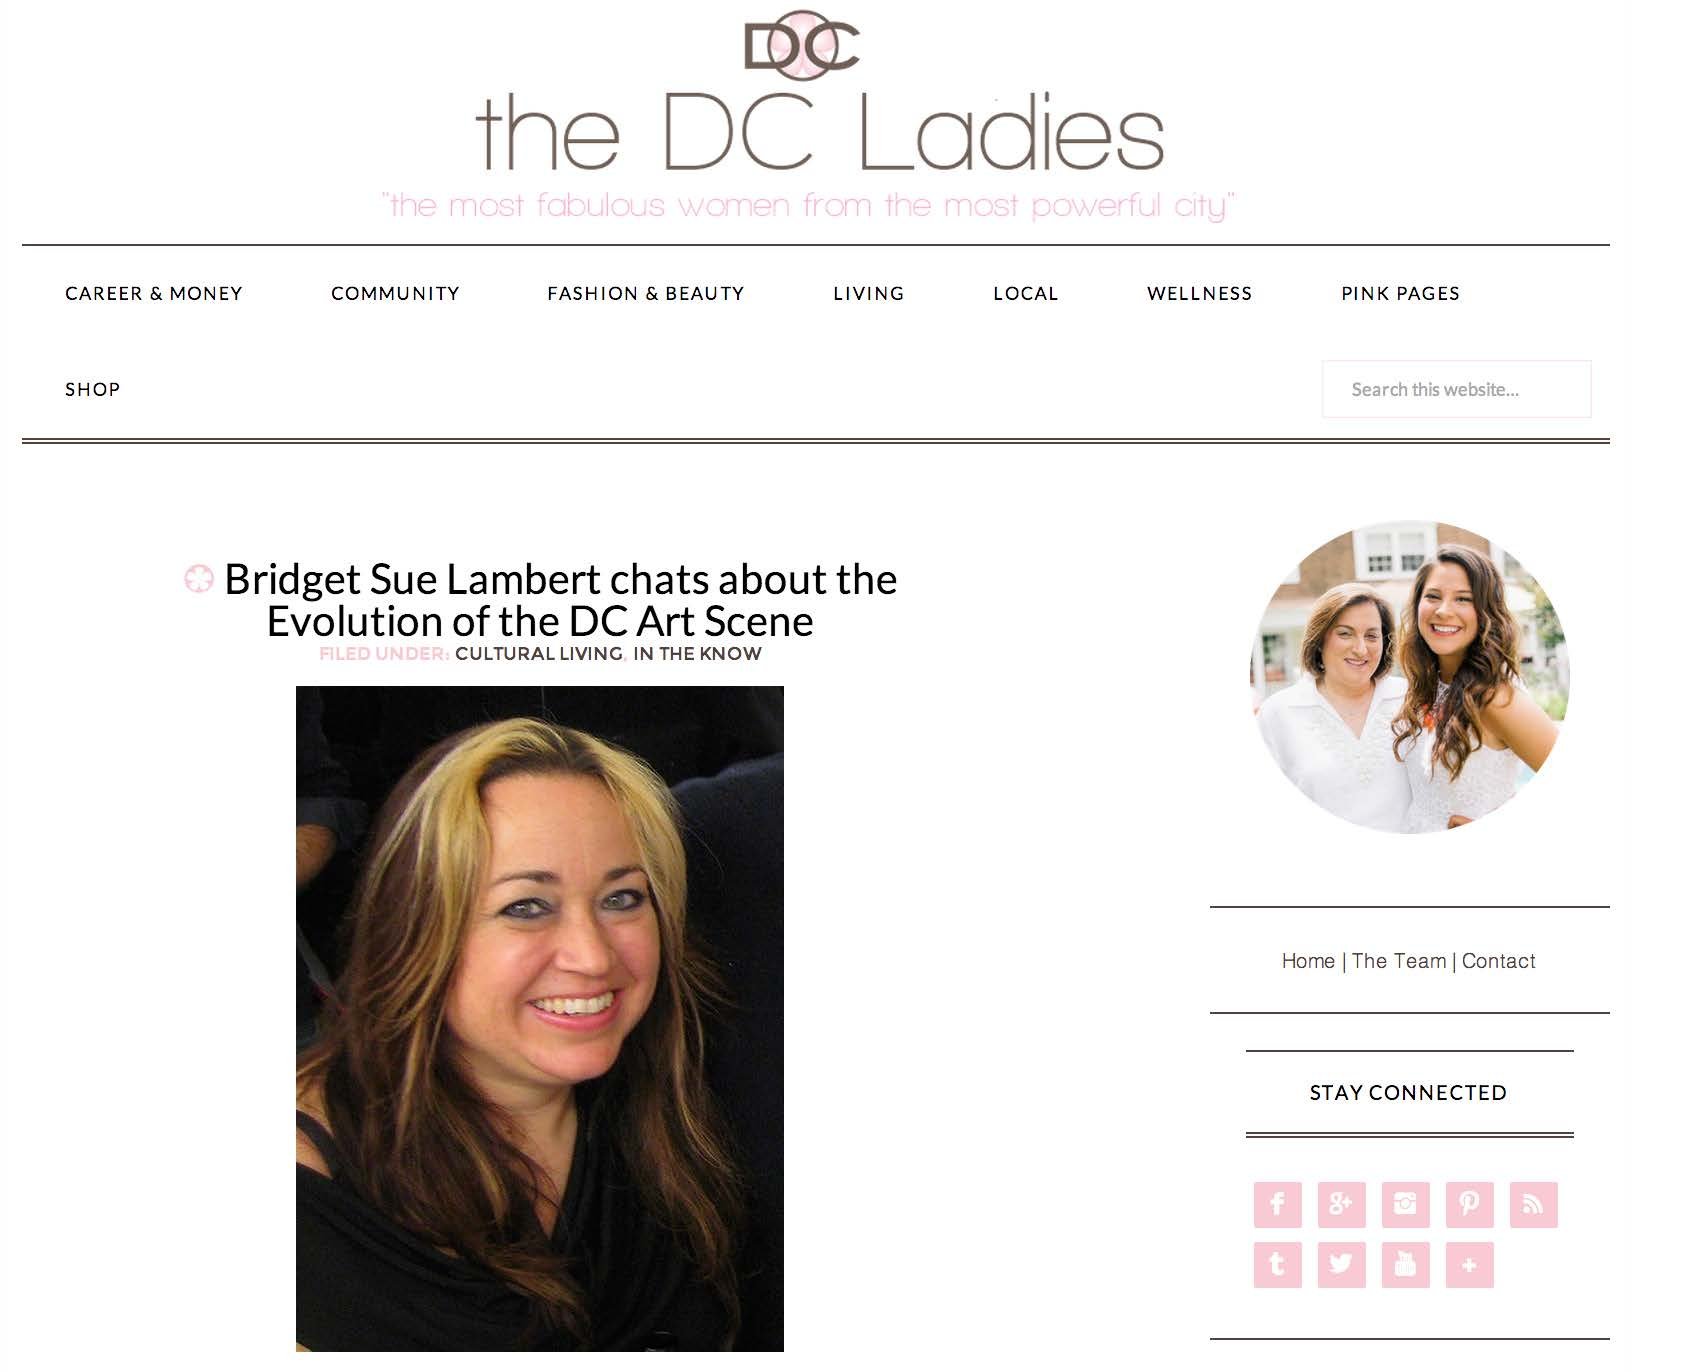 thedcladiescom_Page_1.jpg